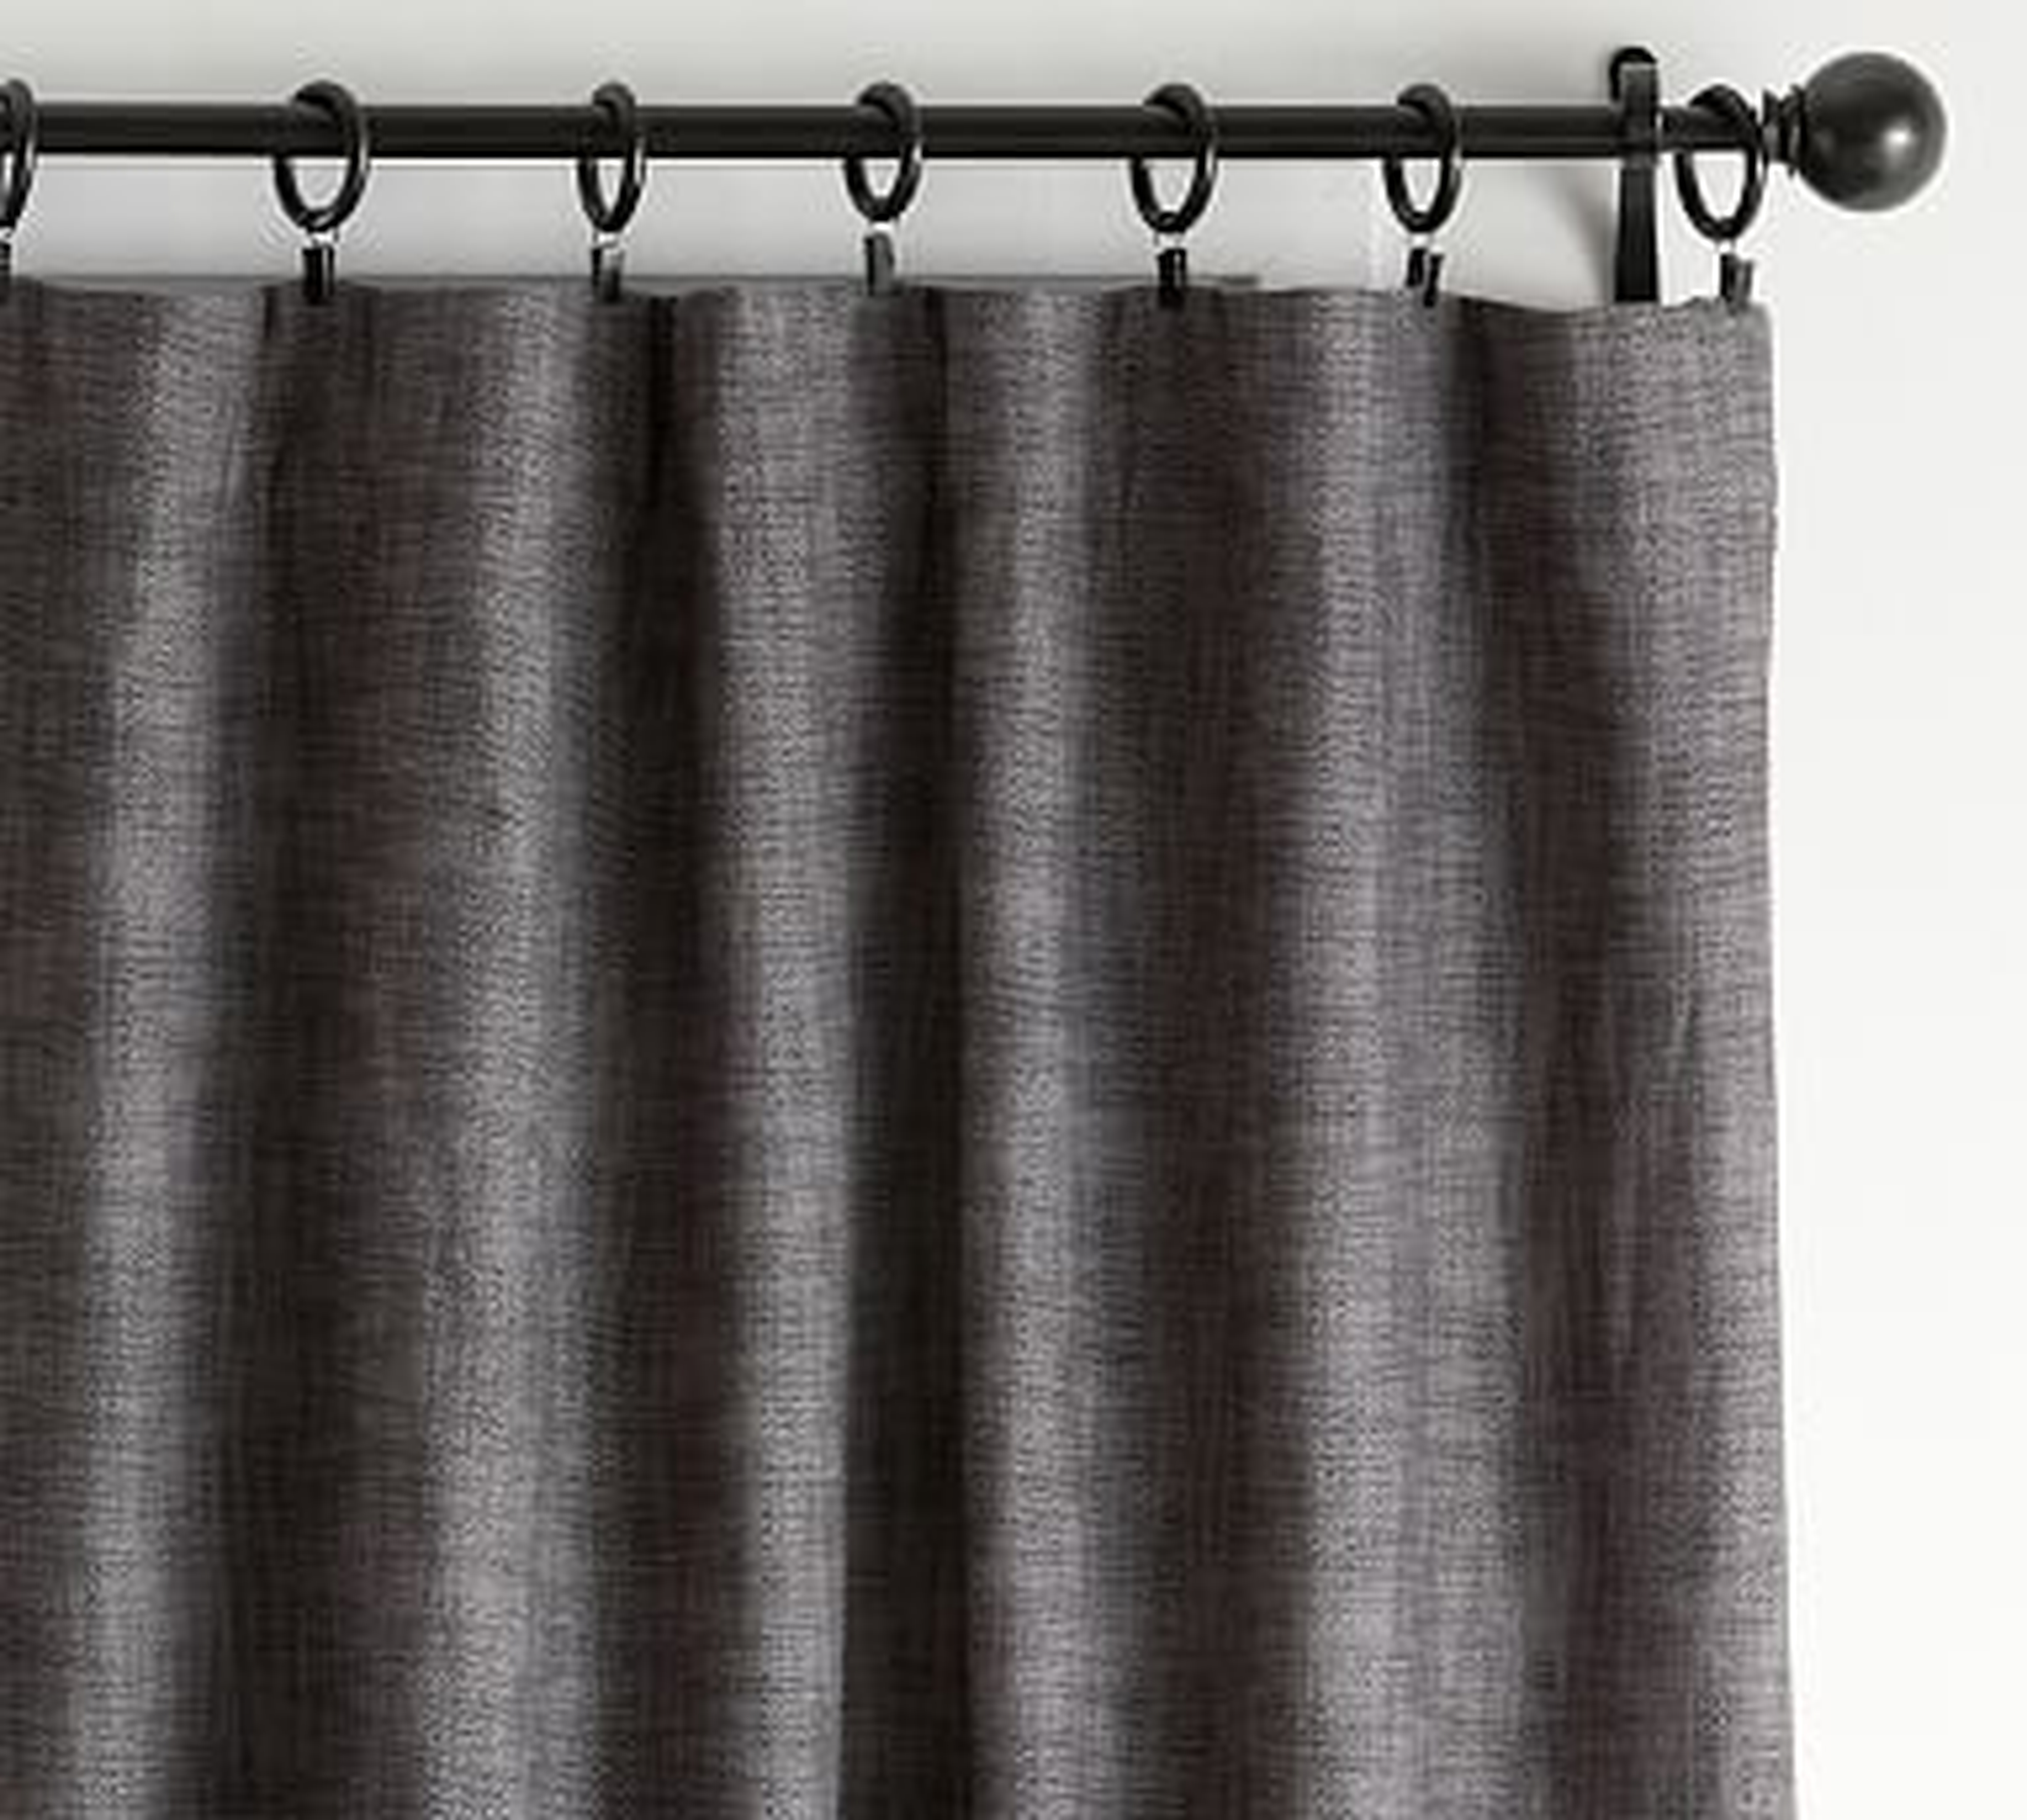 Seaton Textured Blackout Curtain, 50 x 84", Charcoal - Pottery Barn